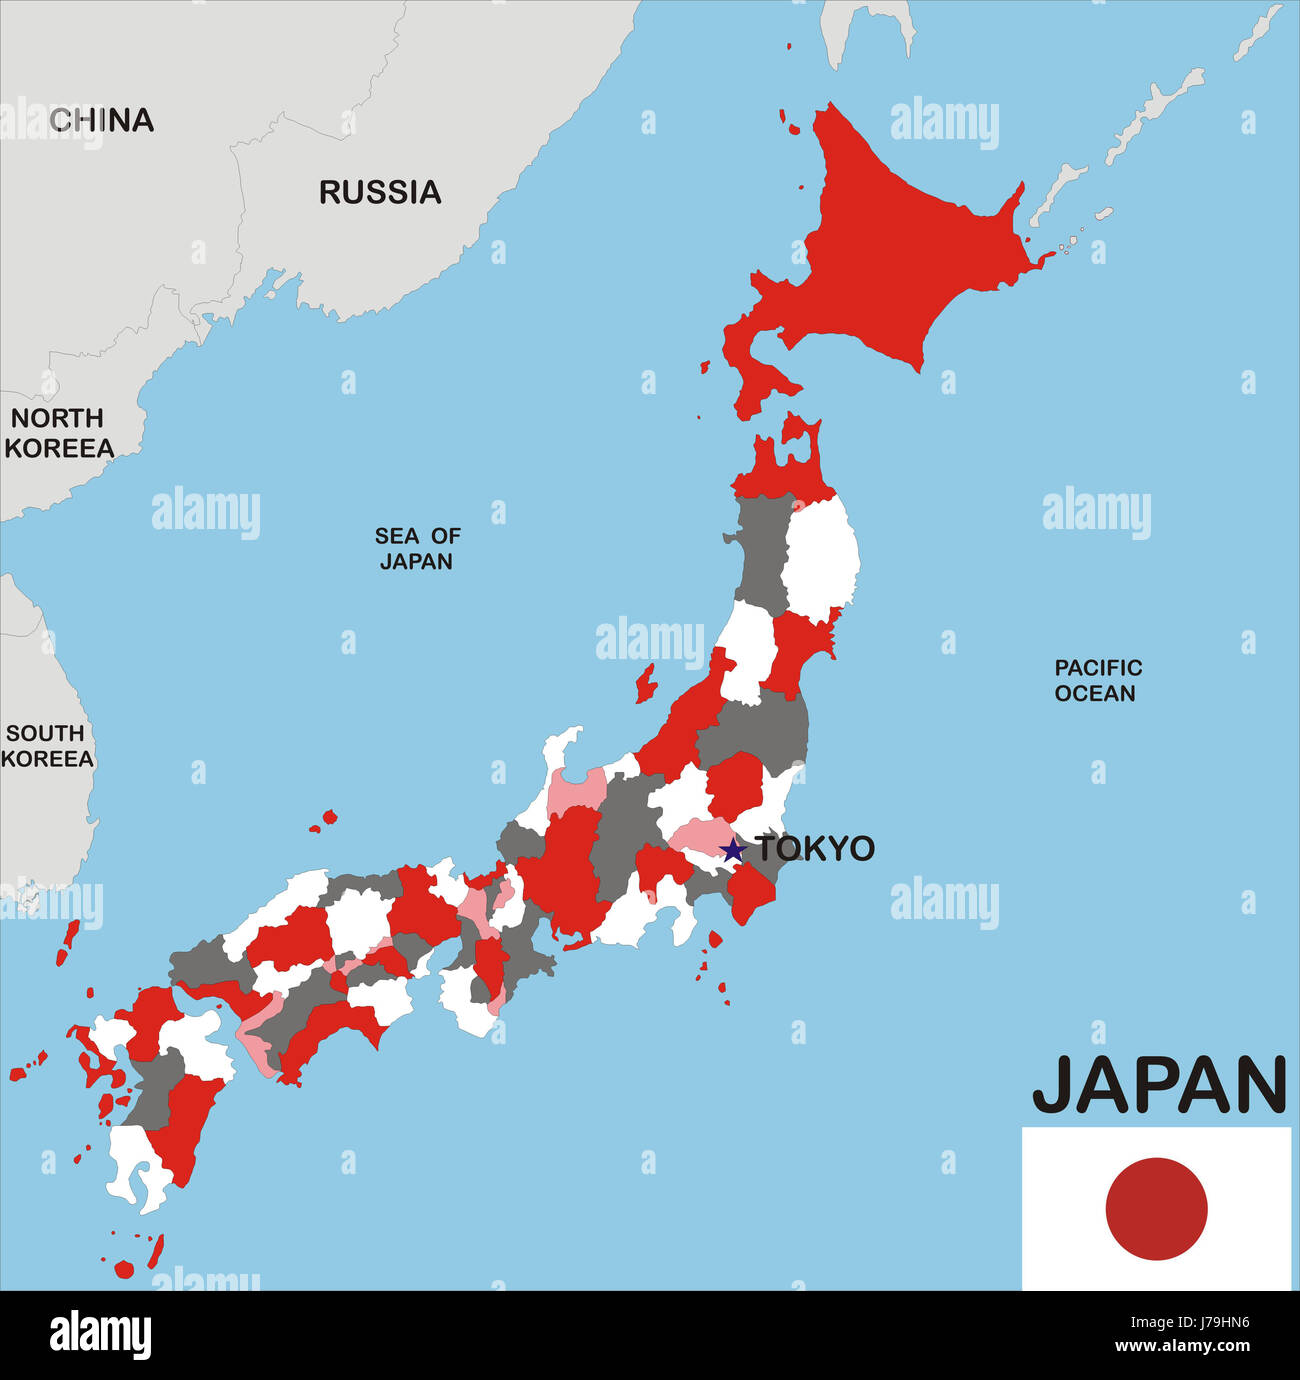 japan map atlas map of the world political illustration flag japan country Stock Photo